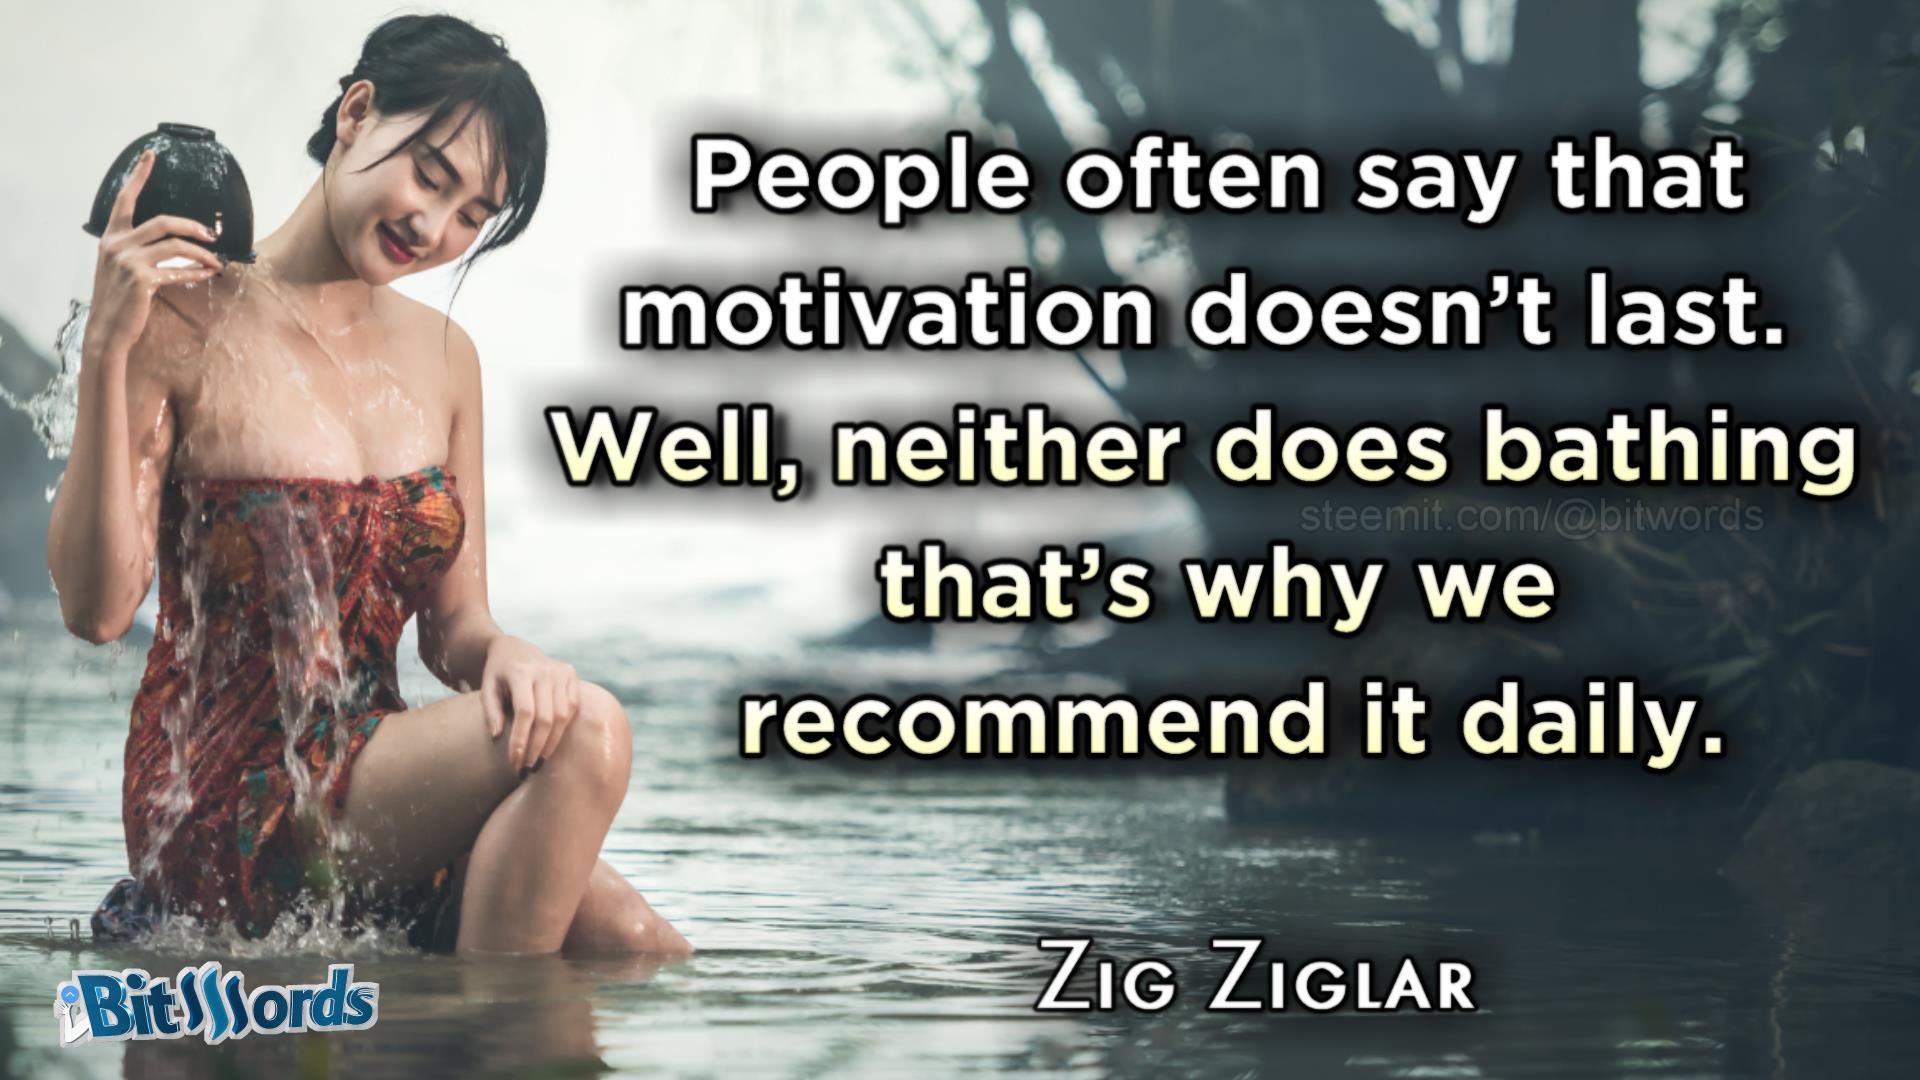 bitwords steemit daily dose of motivation people ofthen say that motivation doesnt last well neither does bath thats why we recommend it daily zig ziglar.jpg